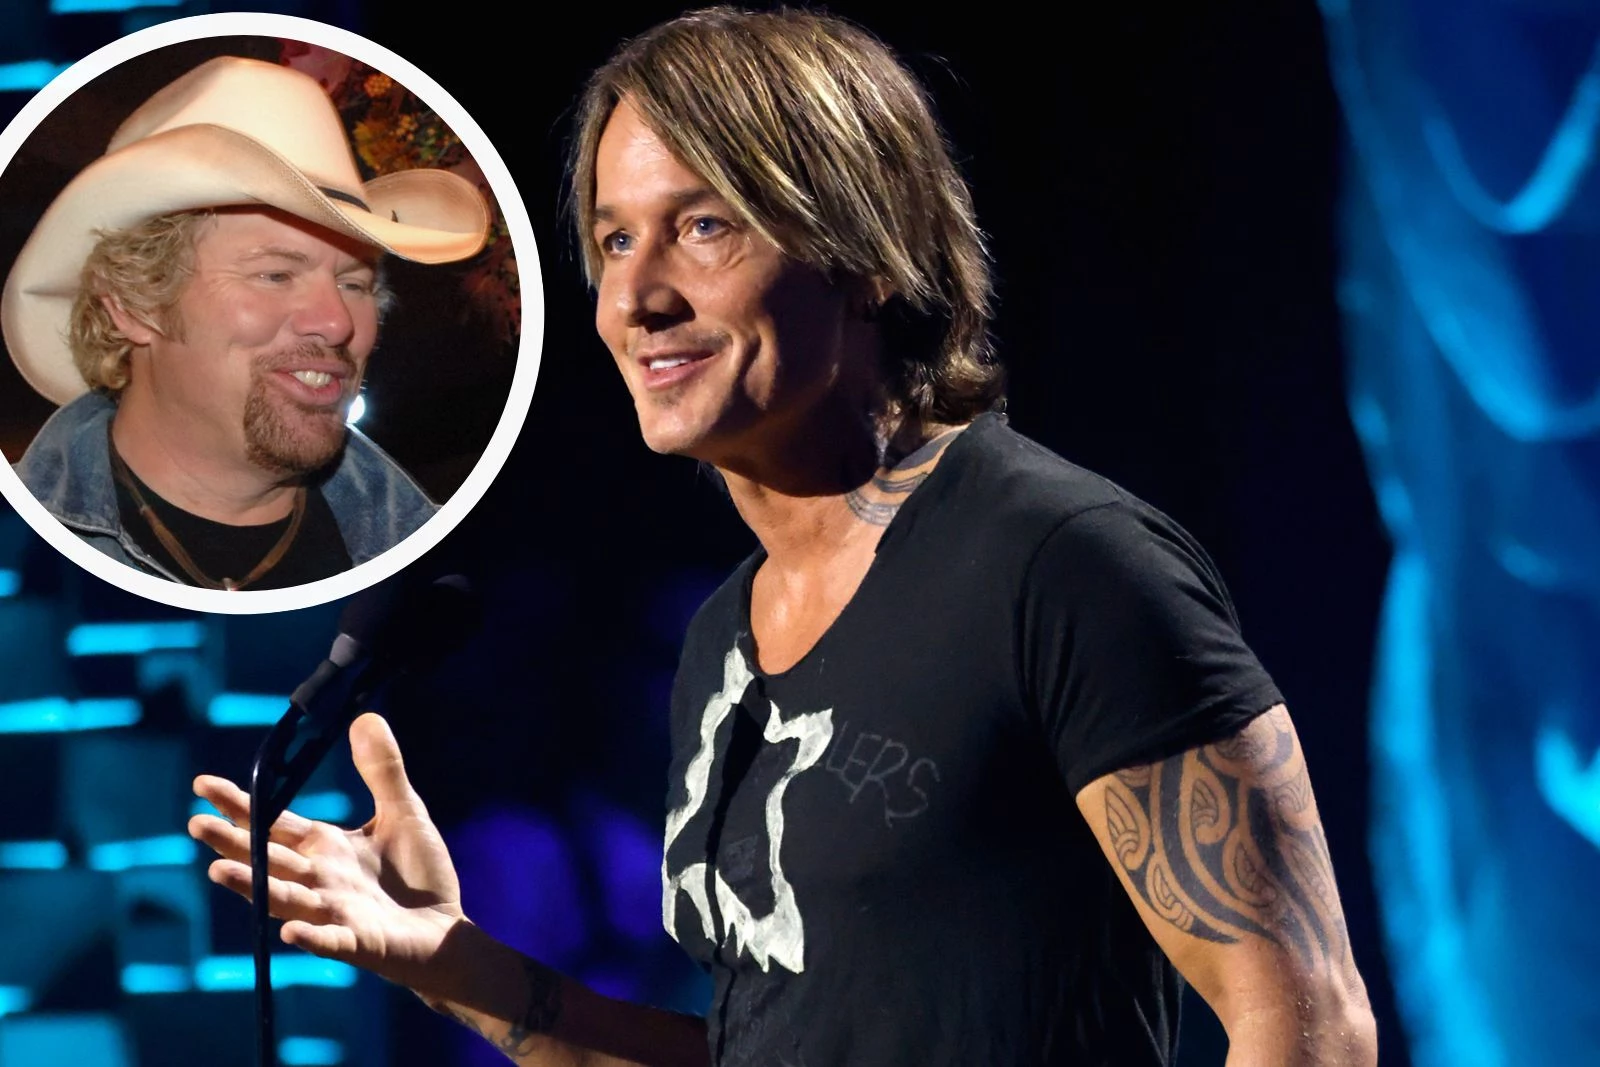 Keith Urban’s Unexpected First Encounter With Toby Keith Was
Hilarious